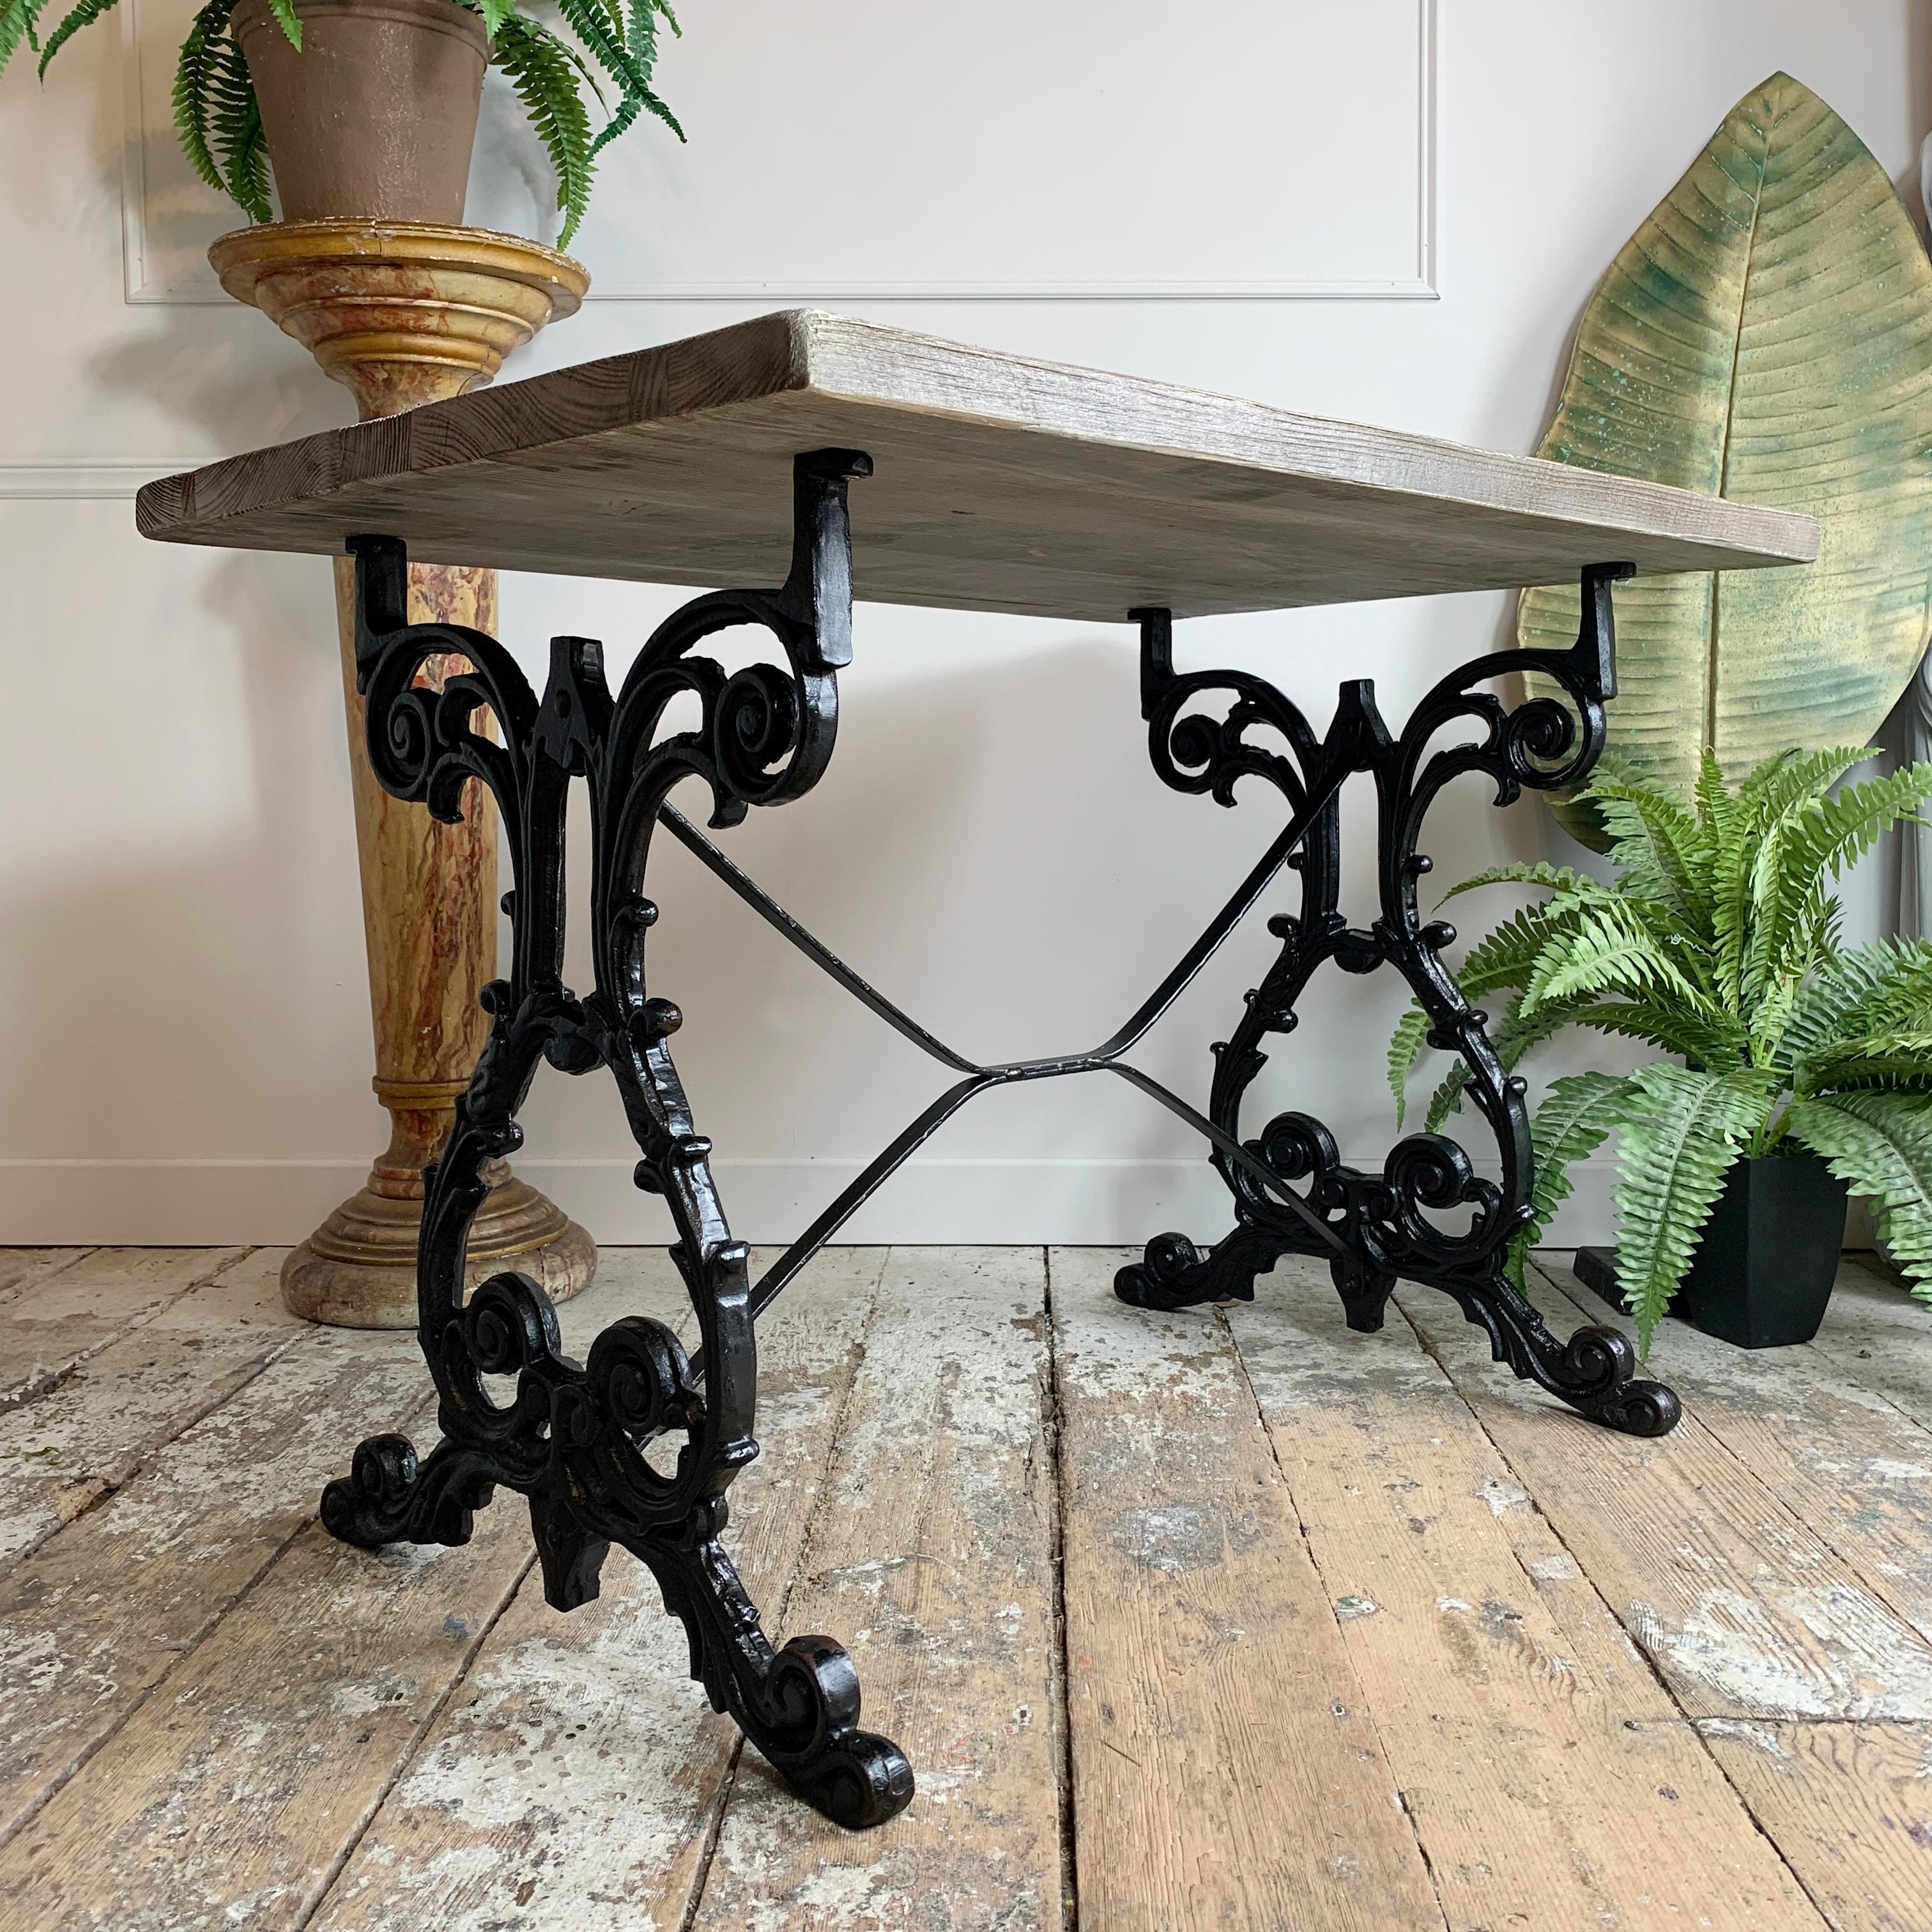 A beautifully cast table, dating to the early 20th century, the legs have been recently refurbished in black, and the top is a bespoke wood worker made thick reclaimed pine, finished in a specially formulated grey-silver wood stain, which blends